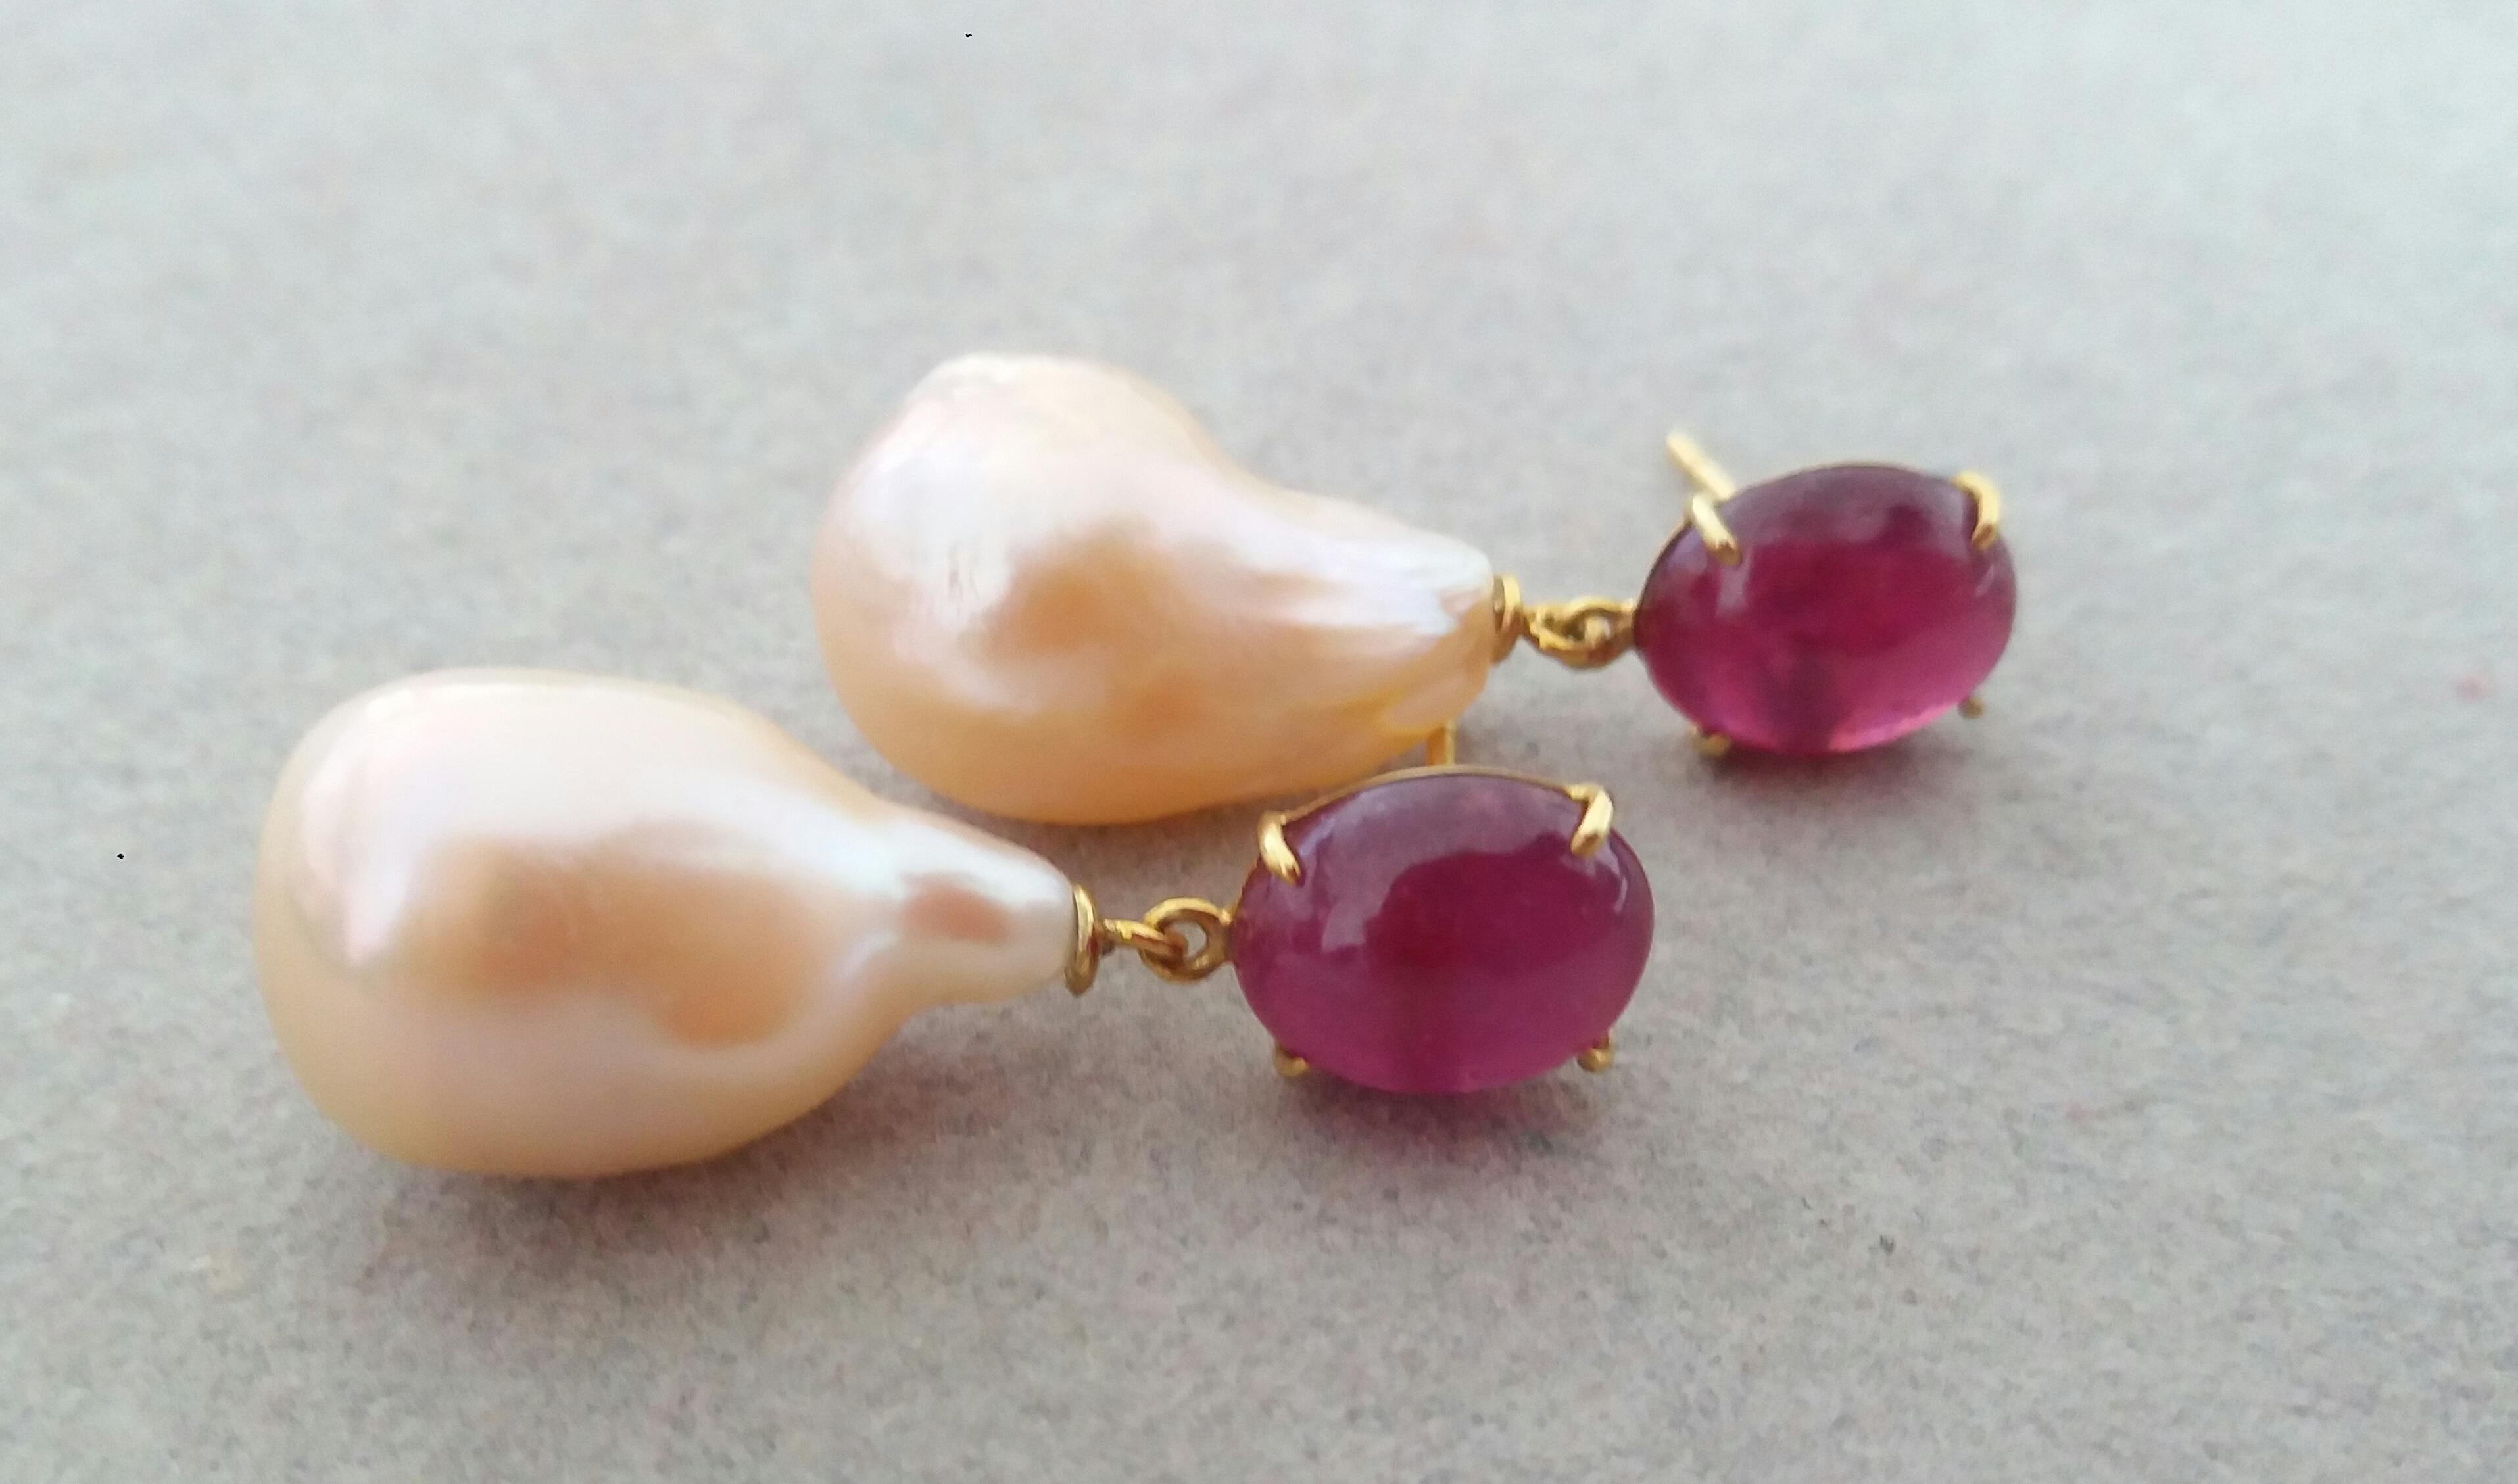 Big Size Pear Shape Cream Color Pearls Oval Ruby Cabochon 14 Karat Gold Earrings For Sale 7